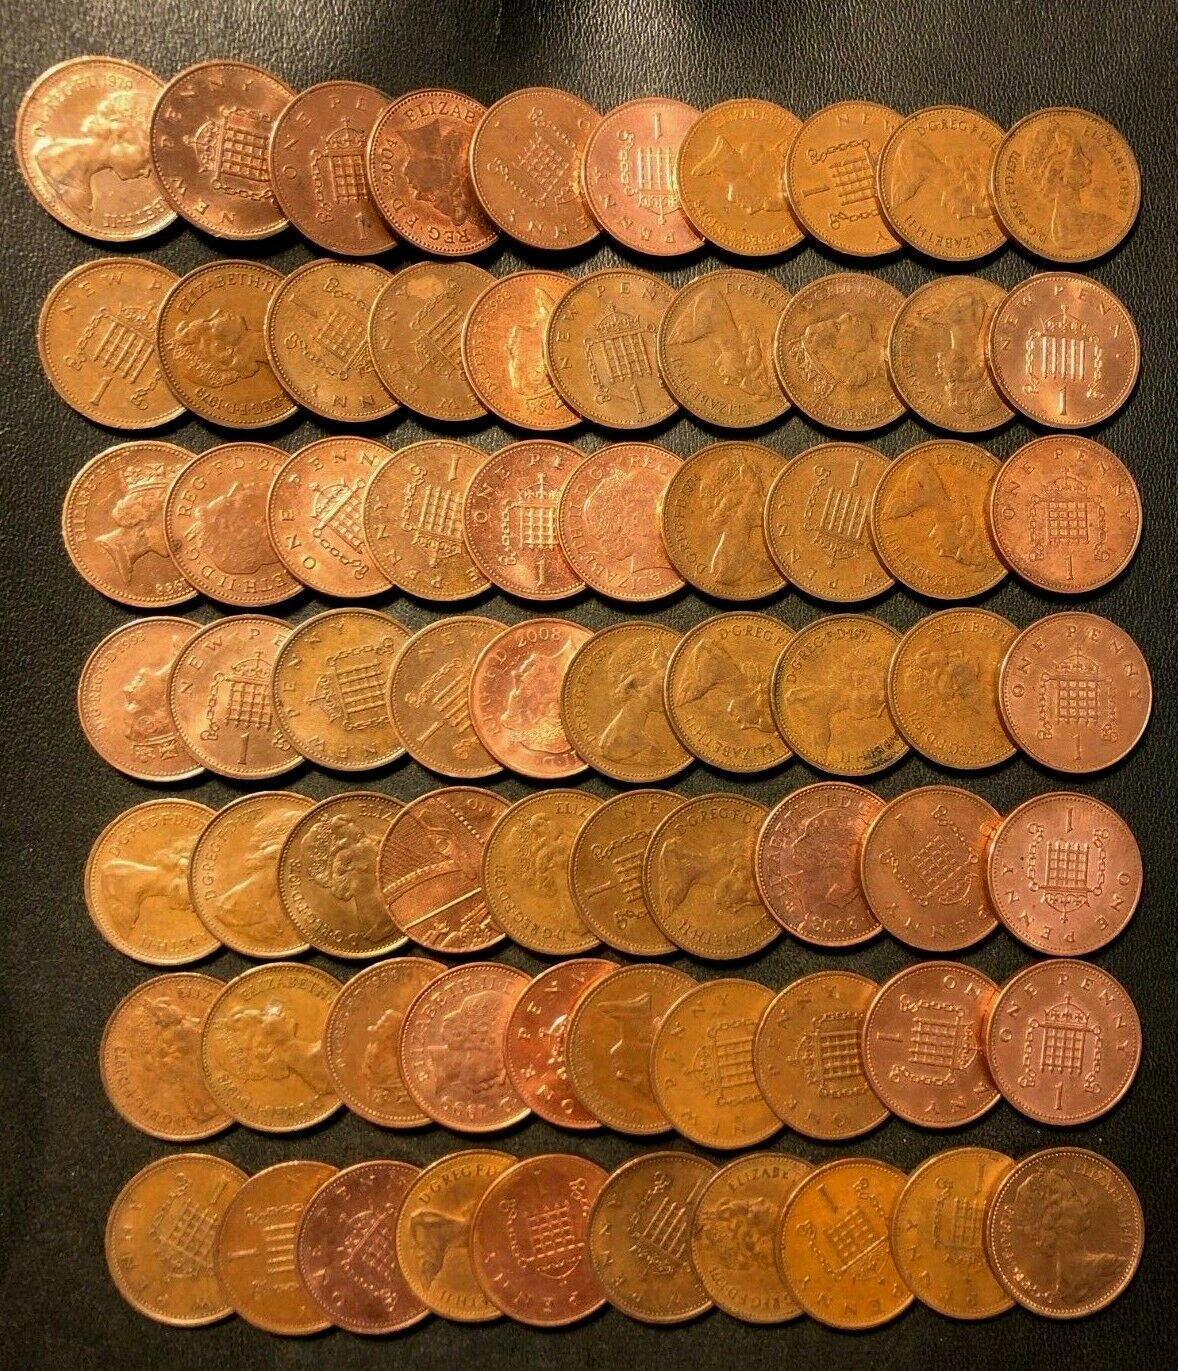 Vintage Great Britain Coin Lot - Pence - 70 Excellent Coins - Lot #a9